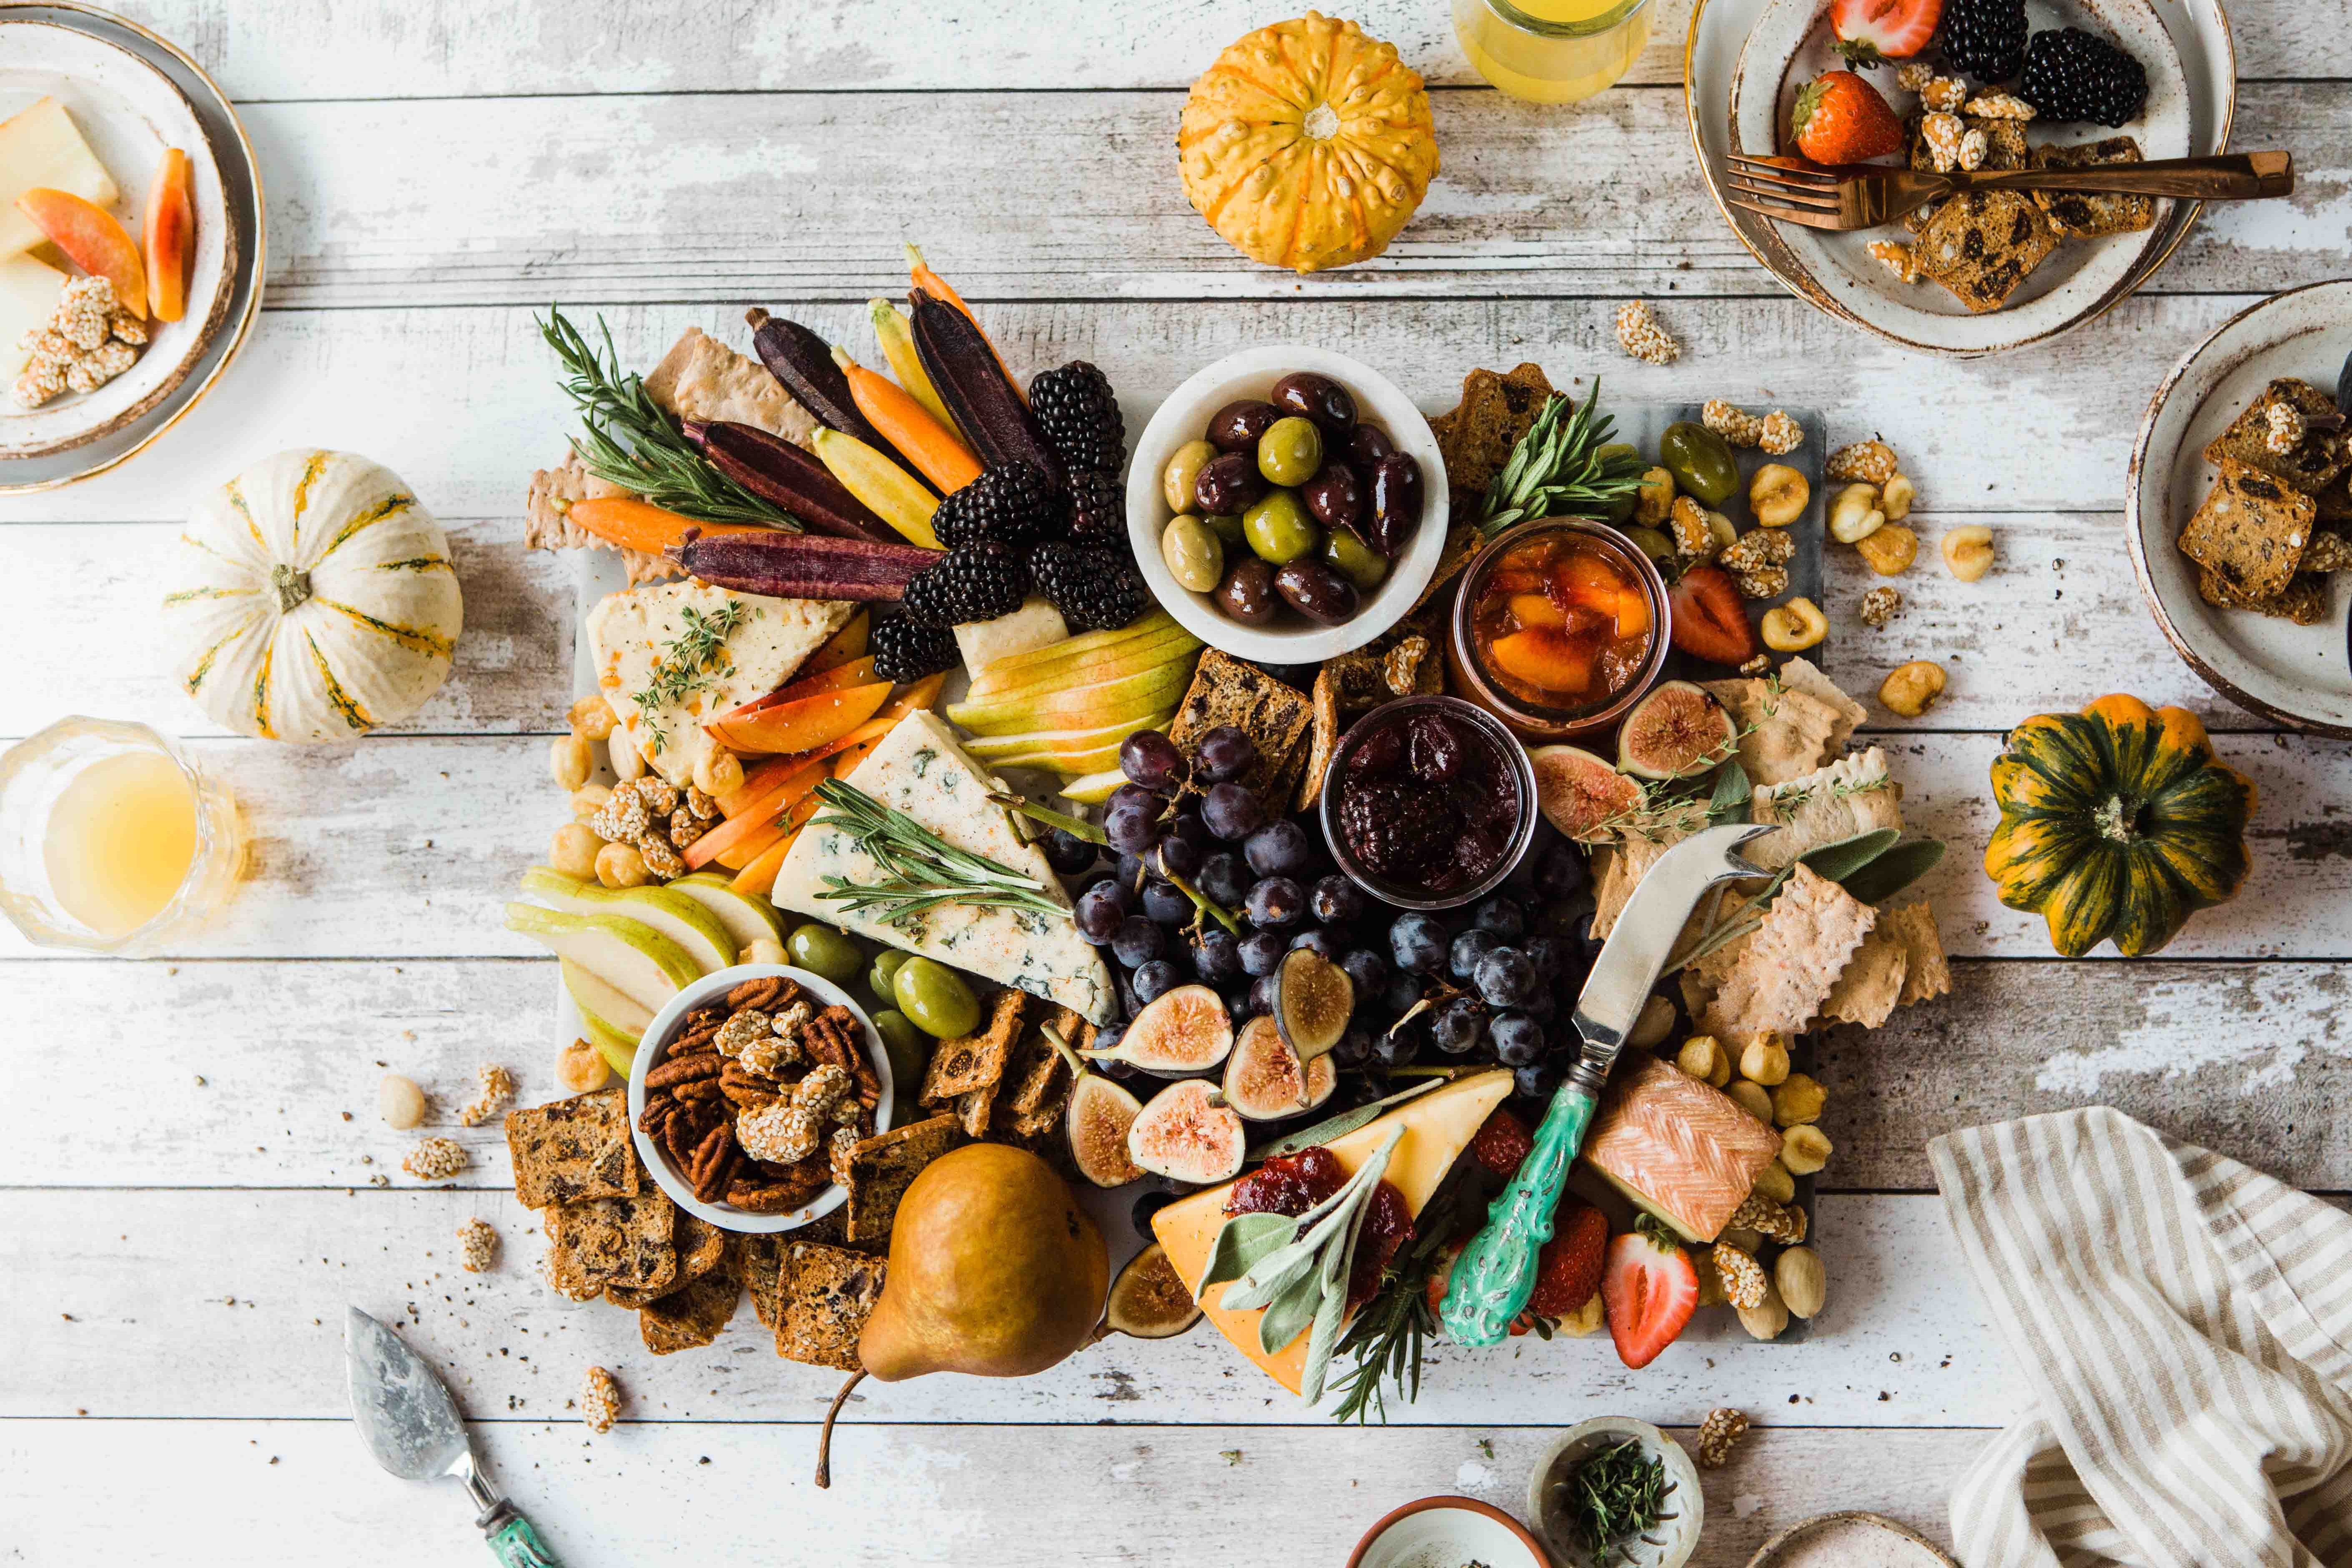 How to Plan the Perfect Friendsgiving Party